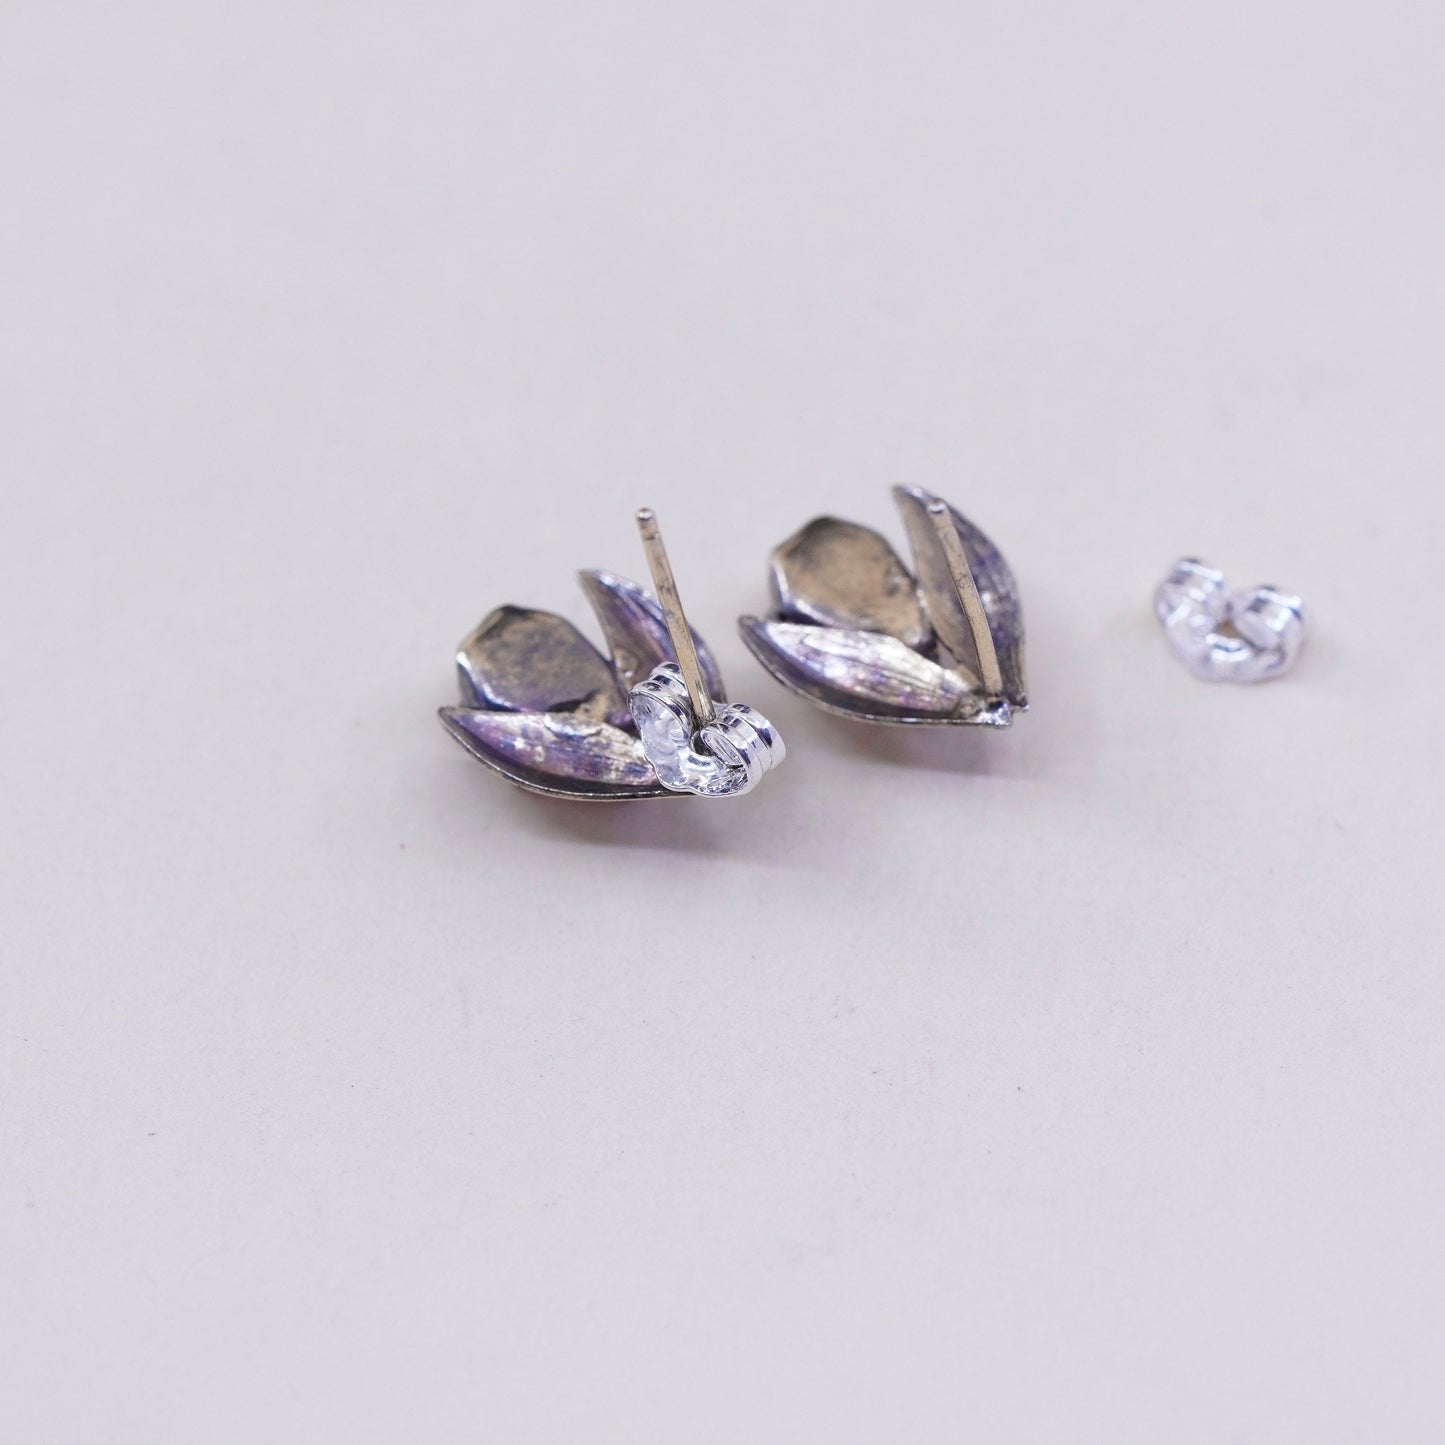 Vintage sterling 925 silver studs earrings with pink Cz and leaf